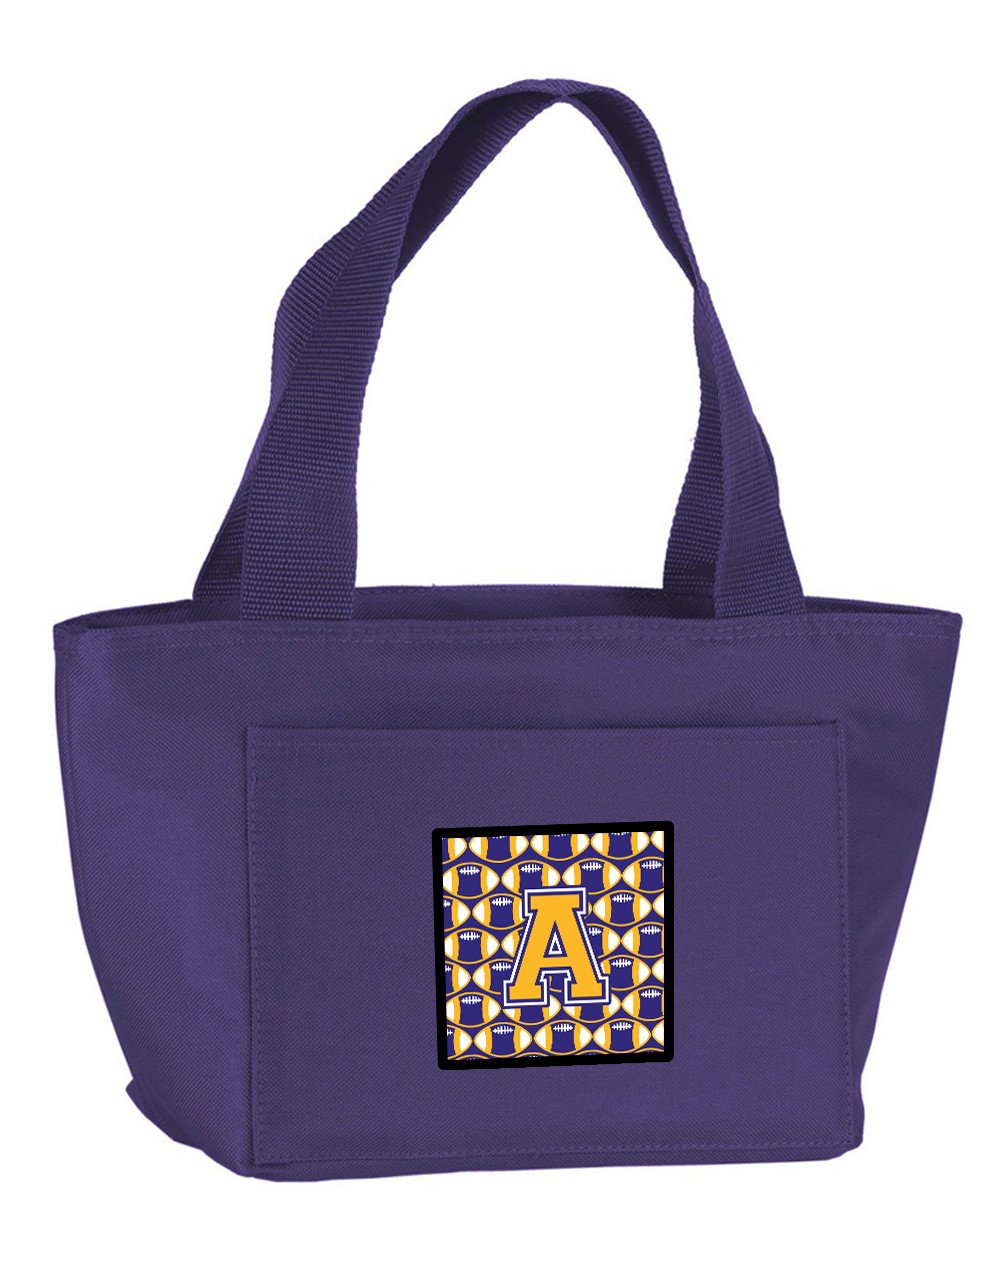 Letter A Football Purple and Gold Lunch Bag CJ1064-APR-8808 by Caroline's Treasures